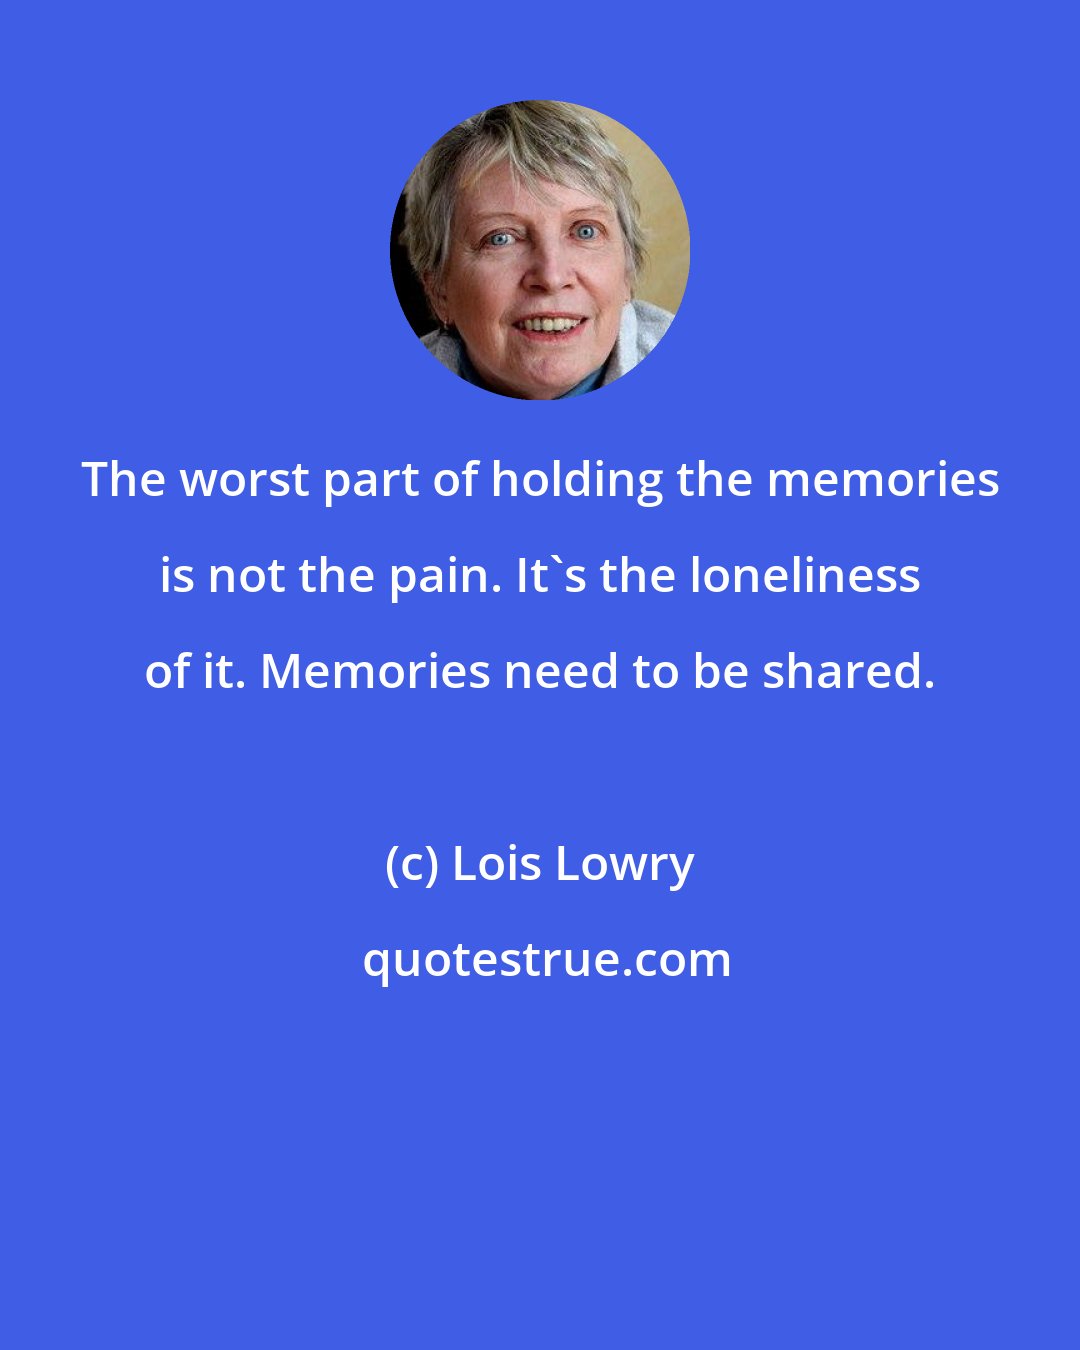 Lois Lowry: The worst part of holding the memories is not the pain. It's the loneliness of it. Memories need to be shared.